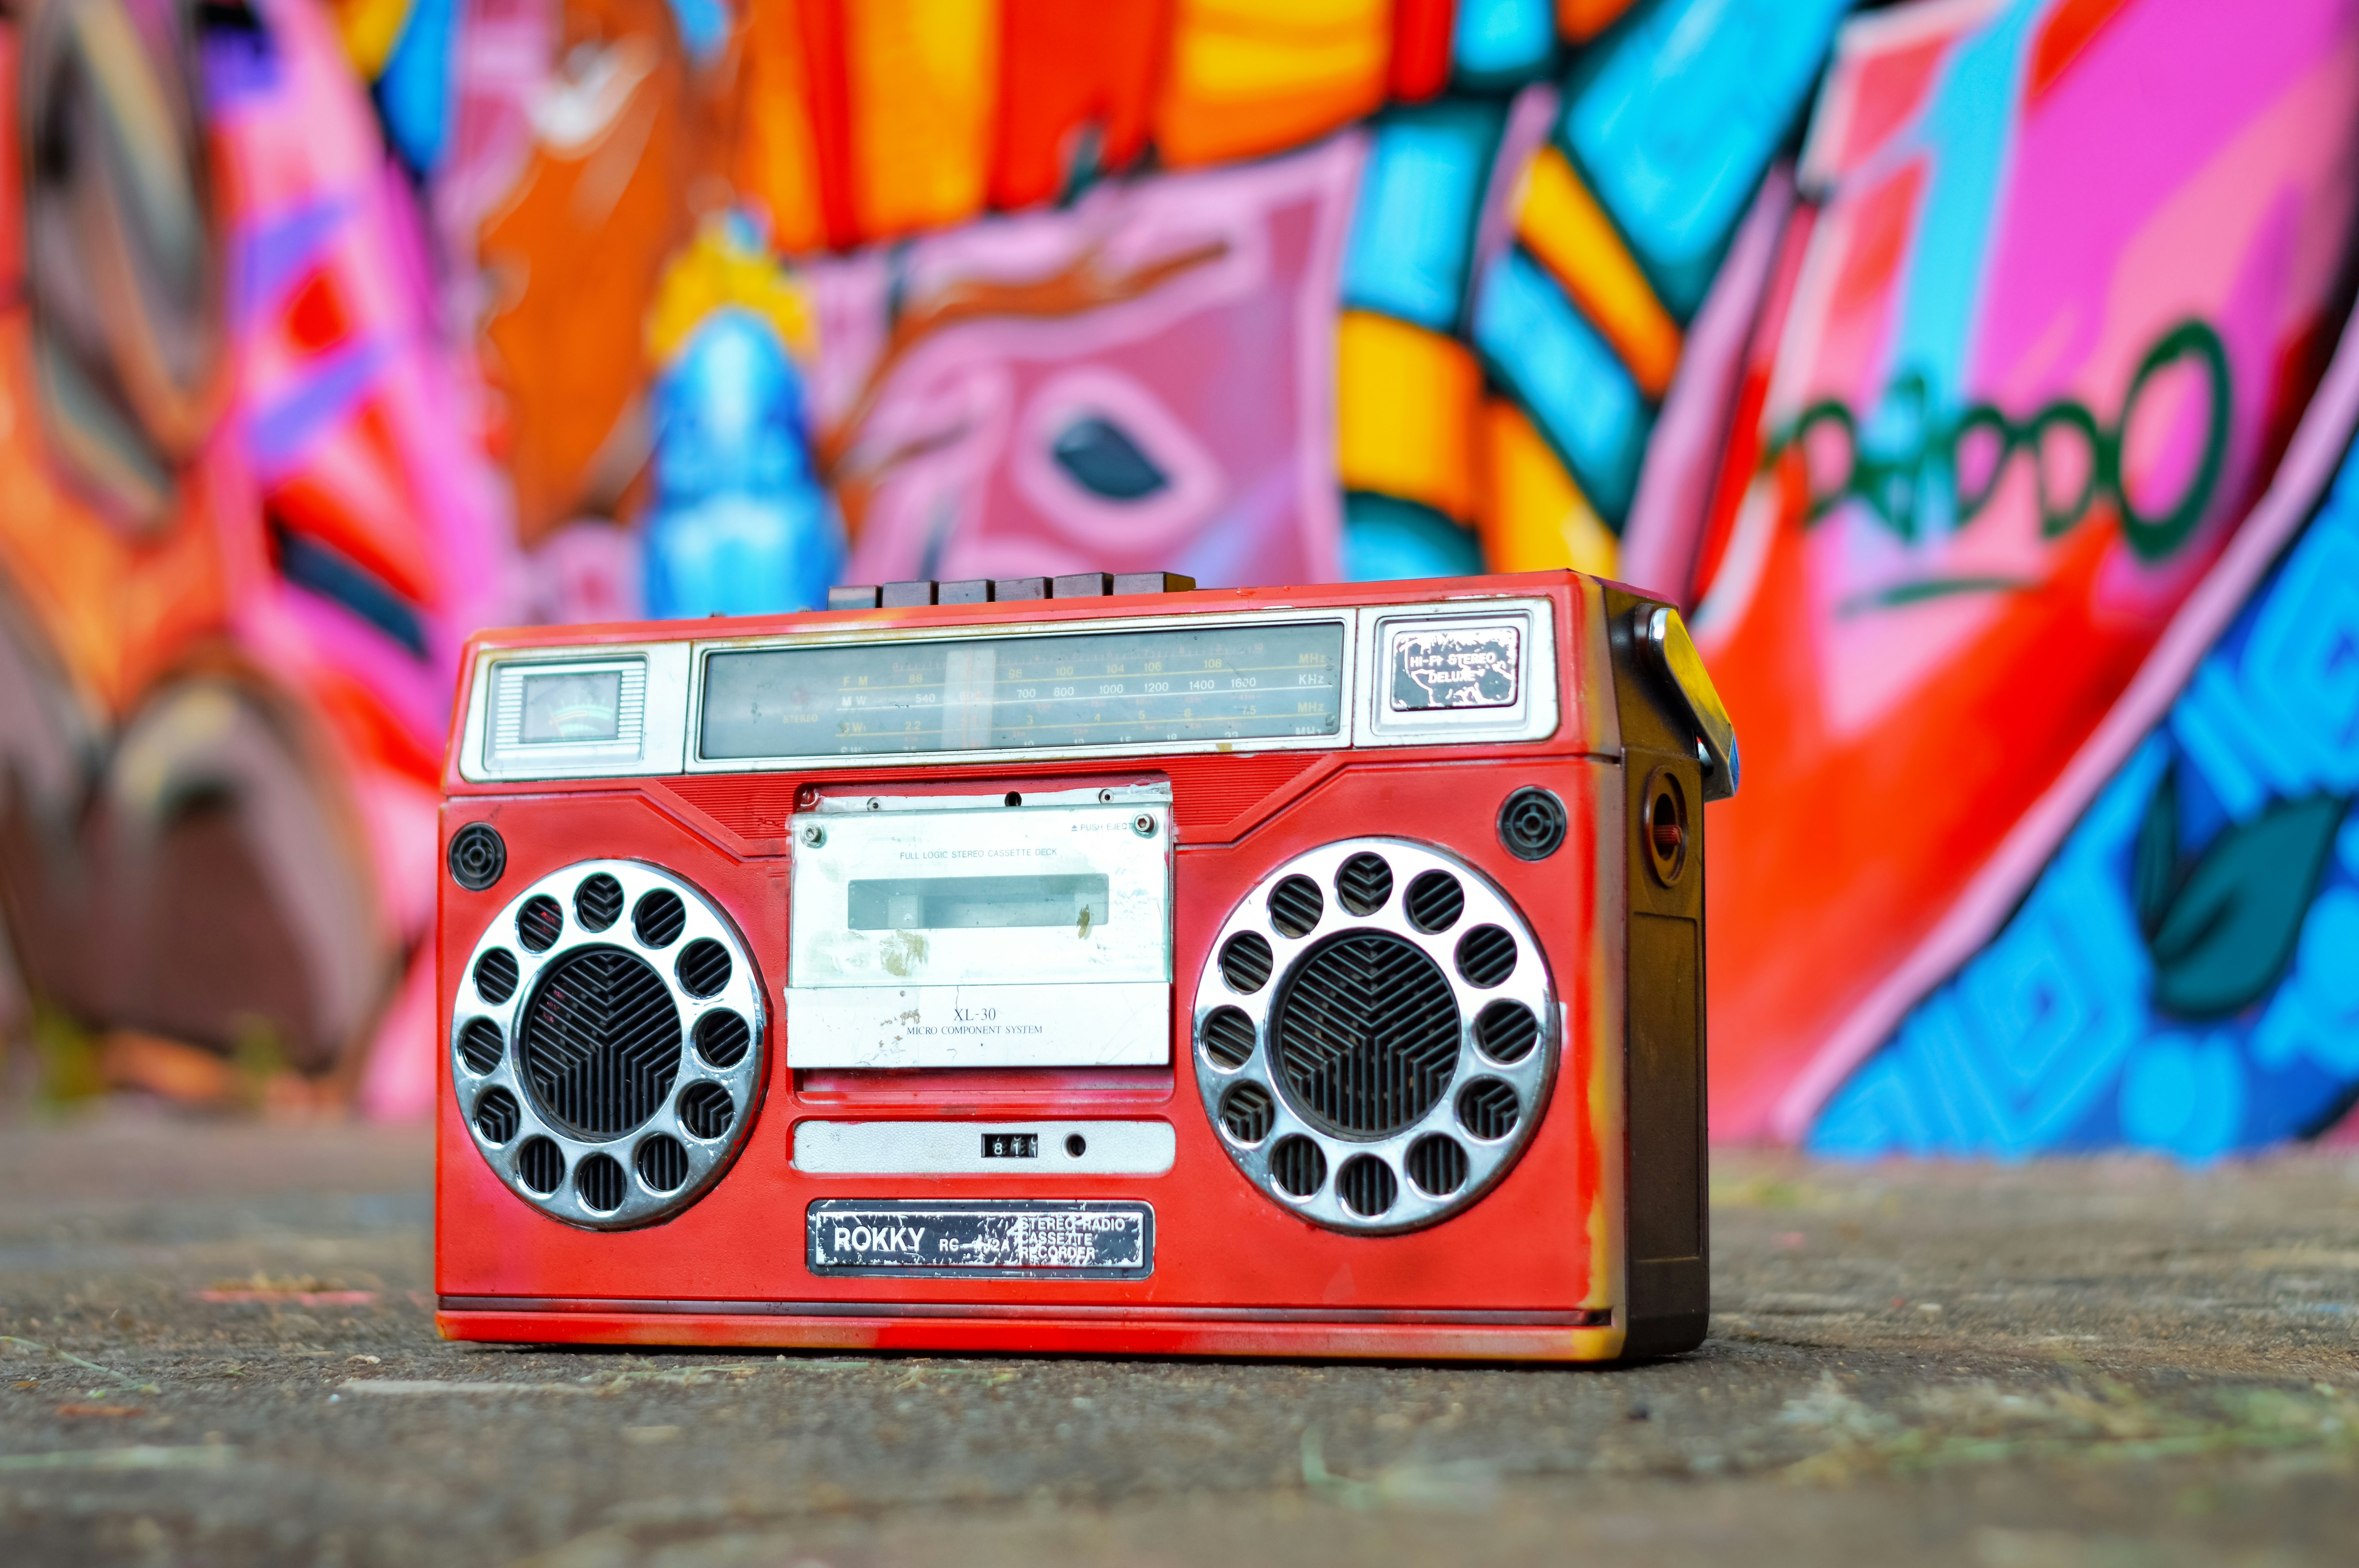 red and silver radio on pink and yellow textile